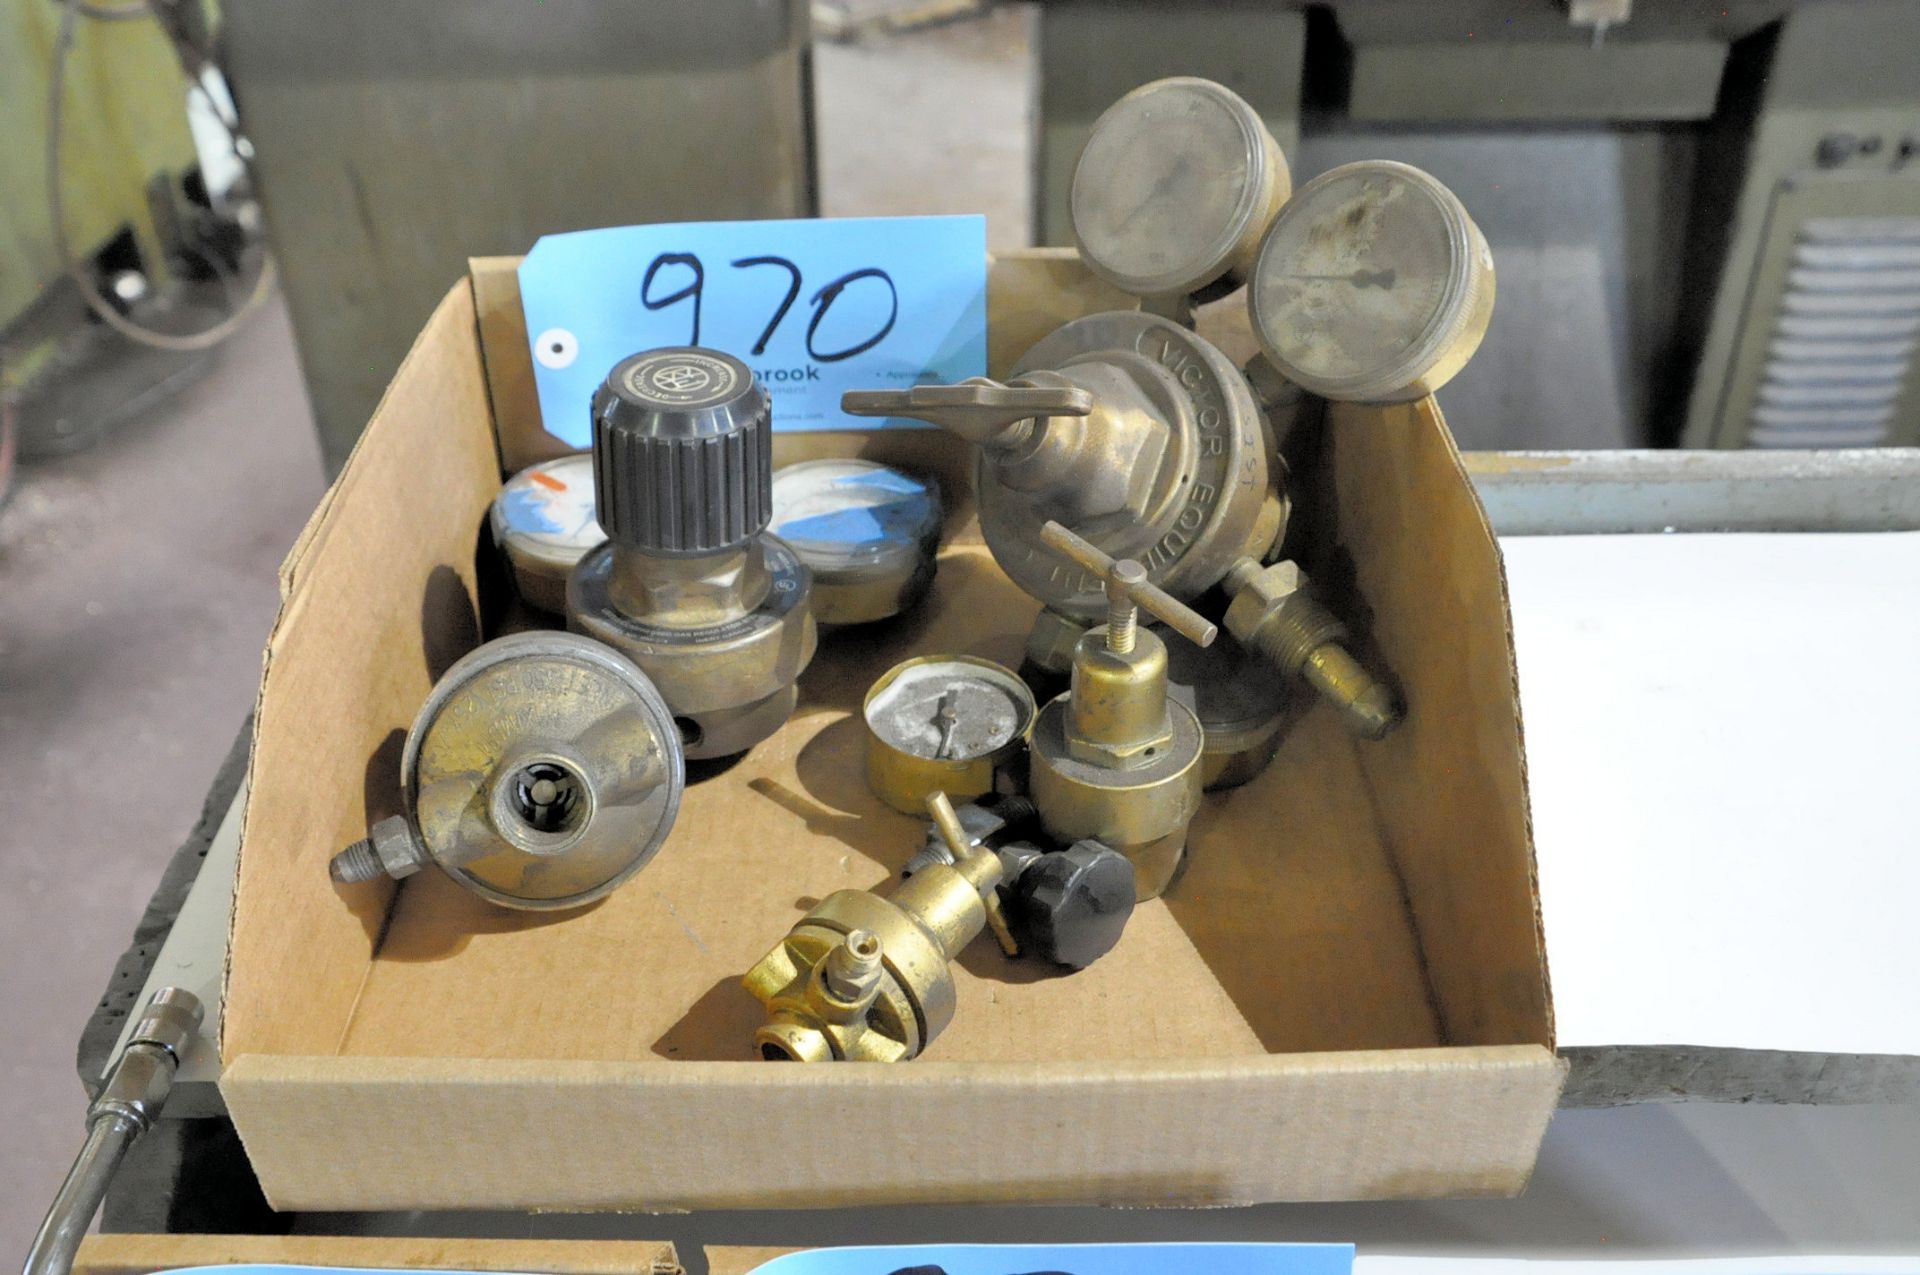 Propane Torch with Small Tanks, Grease Gun, and Regulator Gauges in (4) Boxes - Image 4 of 4